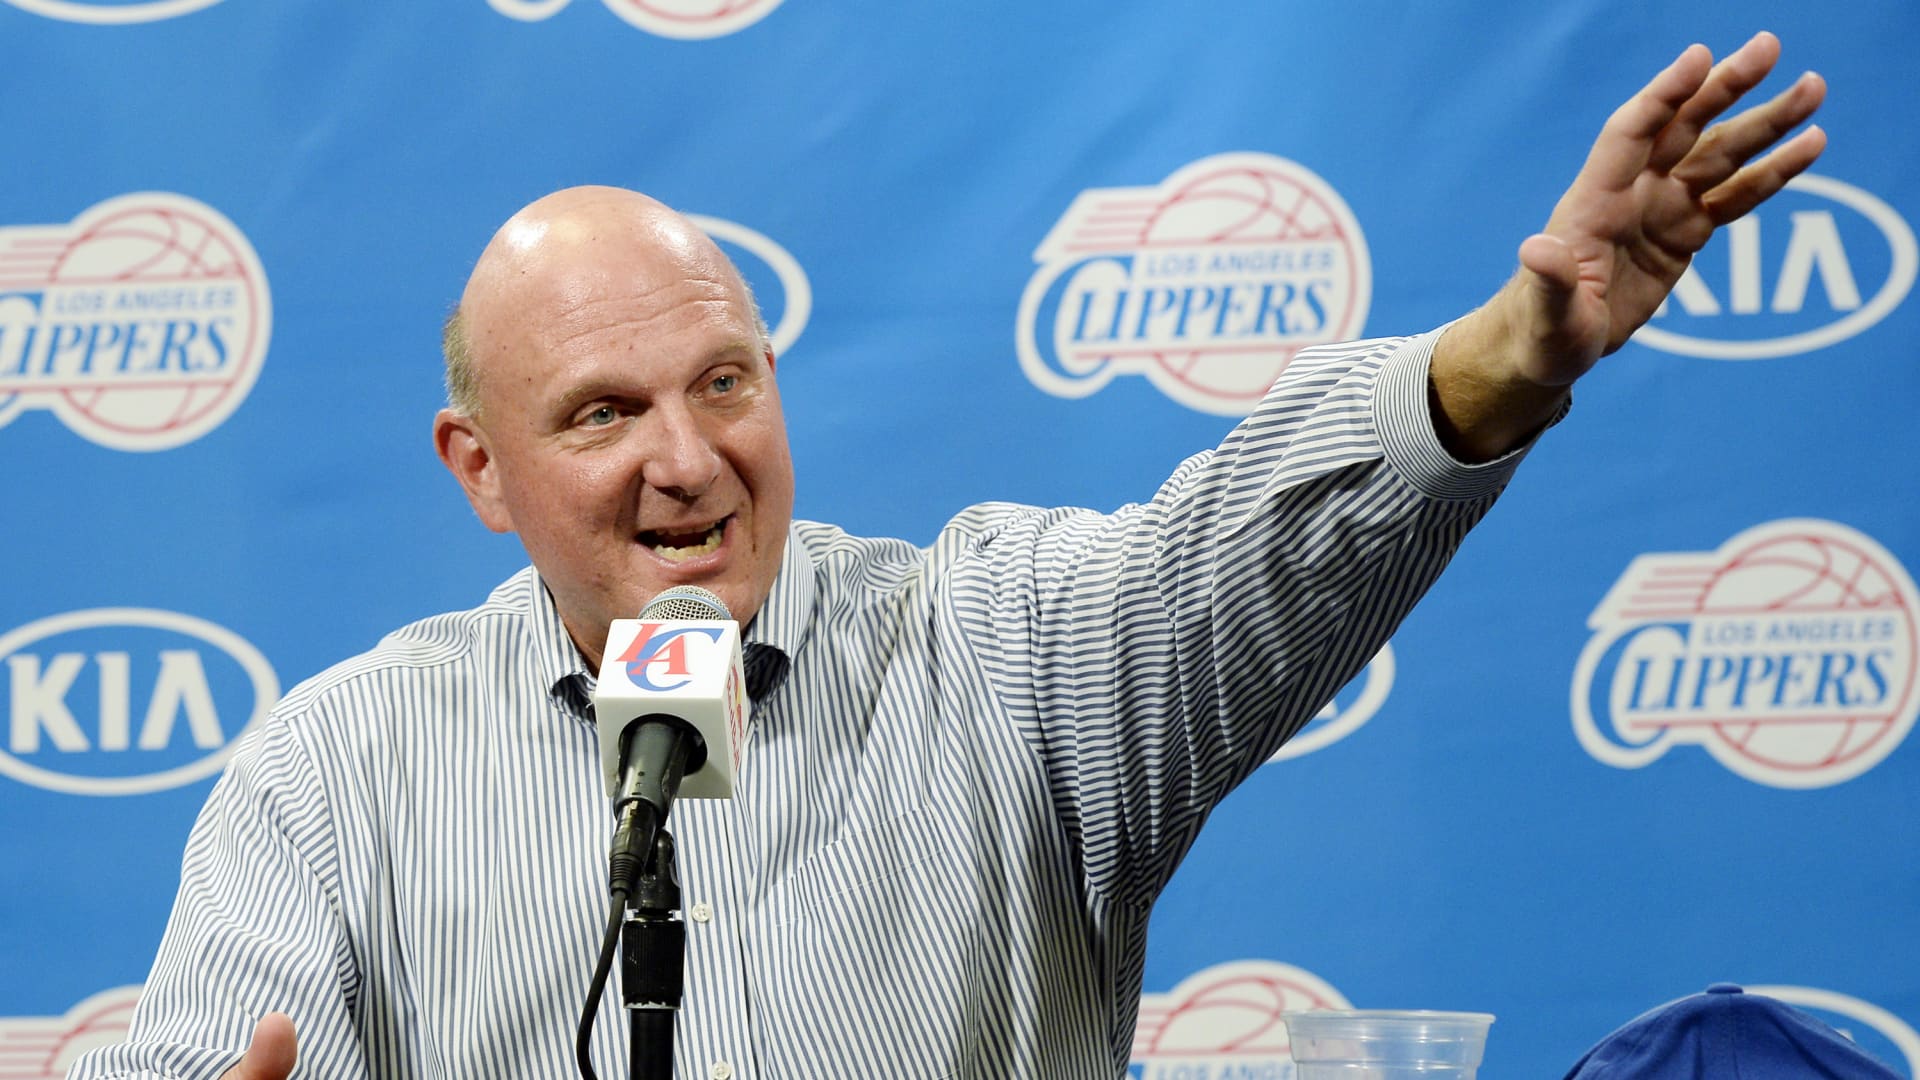 Steve Ballmer, former chief executive officer of Microsoft Corp., gestures as he speaks during a news conference after he was introduced as the new owner of the Los Angeles Clippers in Los Angeles, California.